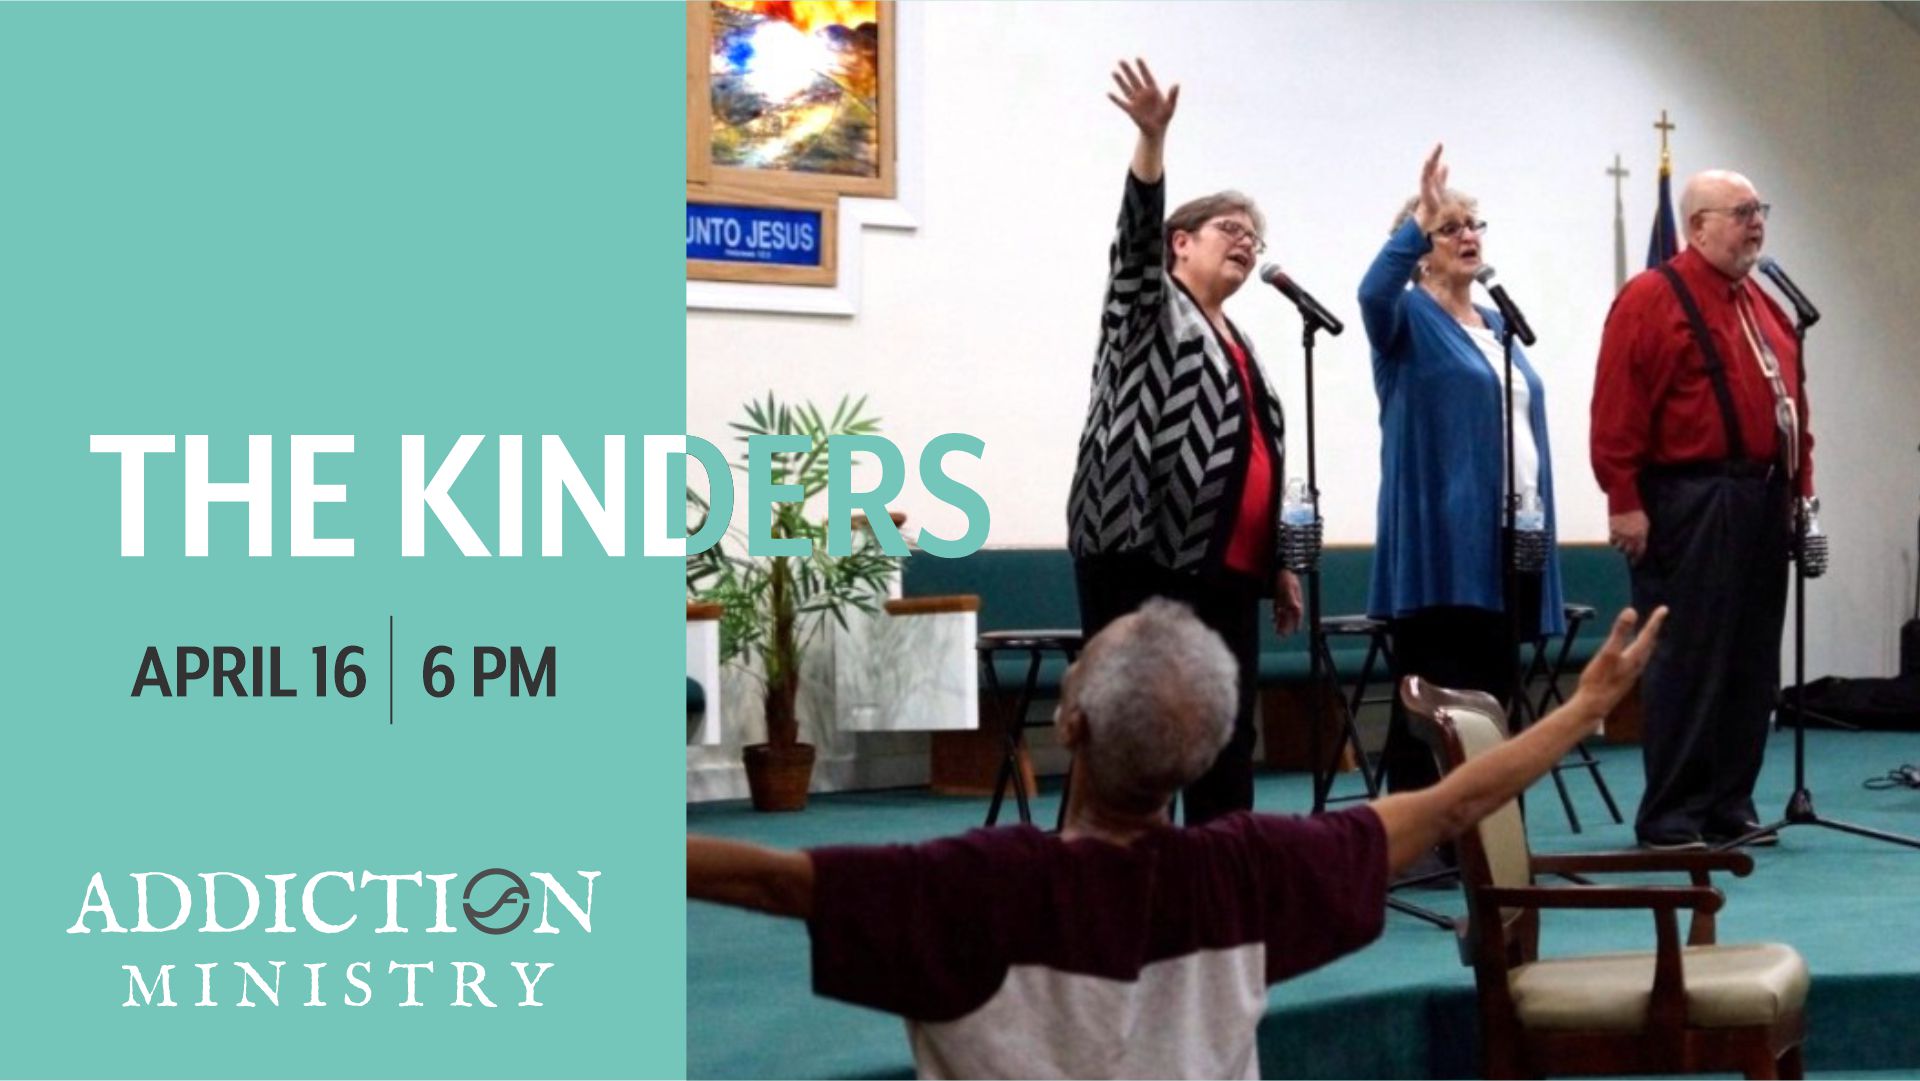 Overflow Addiction Ministry - The Kinders